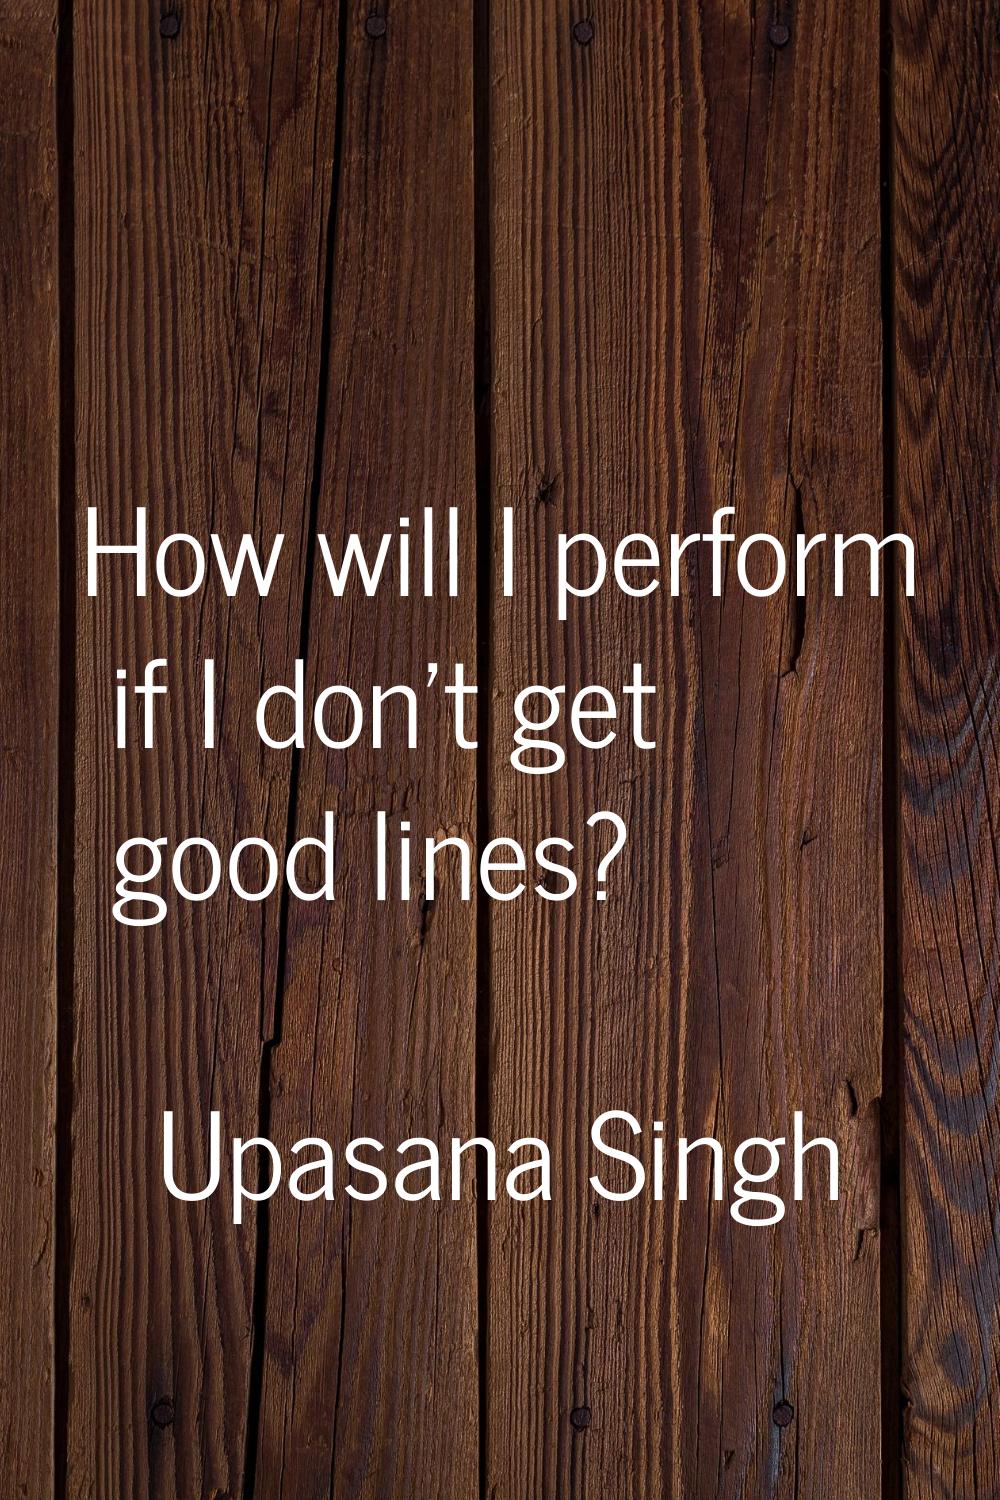 How will I perform if I don't get good lines?